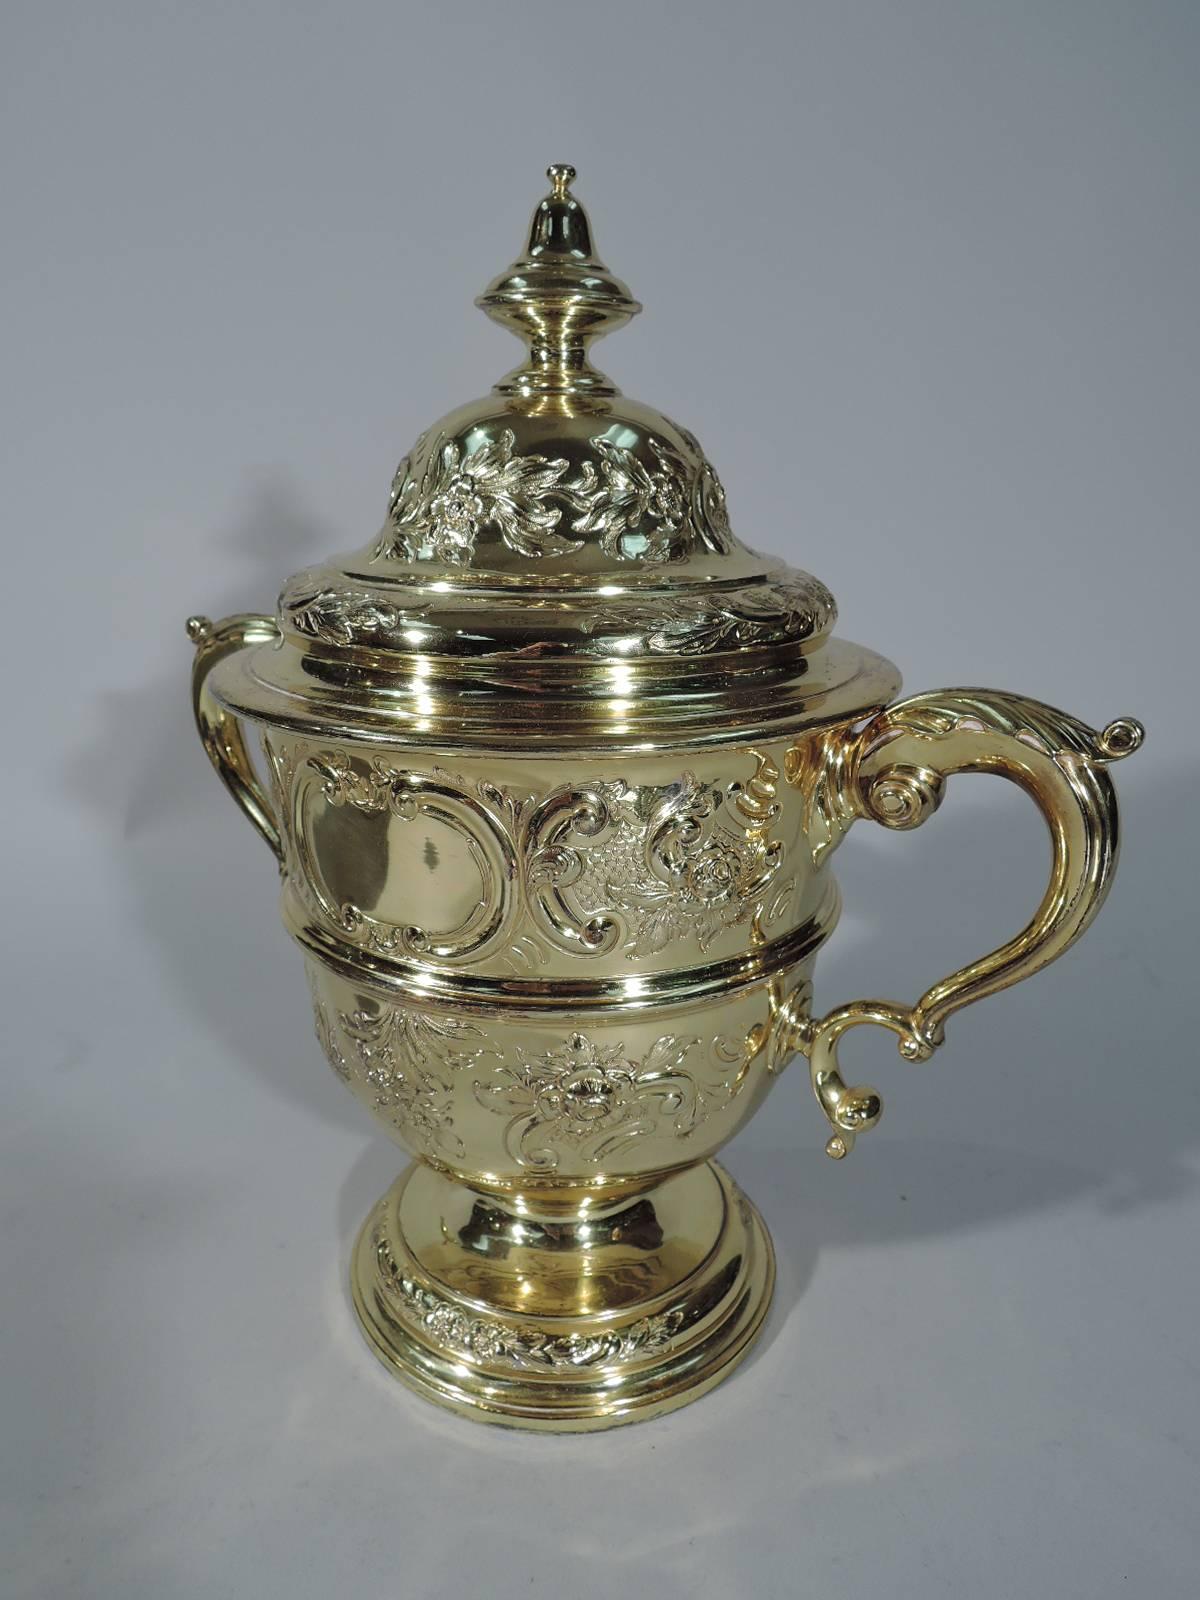 George V sterling silver trophy cup. Made by Edward Barnard & Sons in London in 1916. Ovoid body on raised foot, leaf-capped double-scroll side handles, and dome cover with finial. Chased and repousse flowers and scrolls and 2 scrolled cartouches